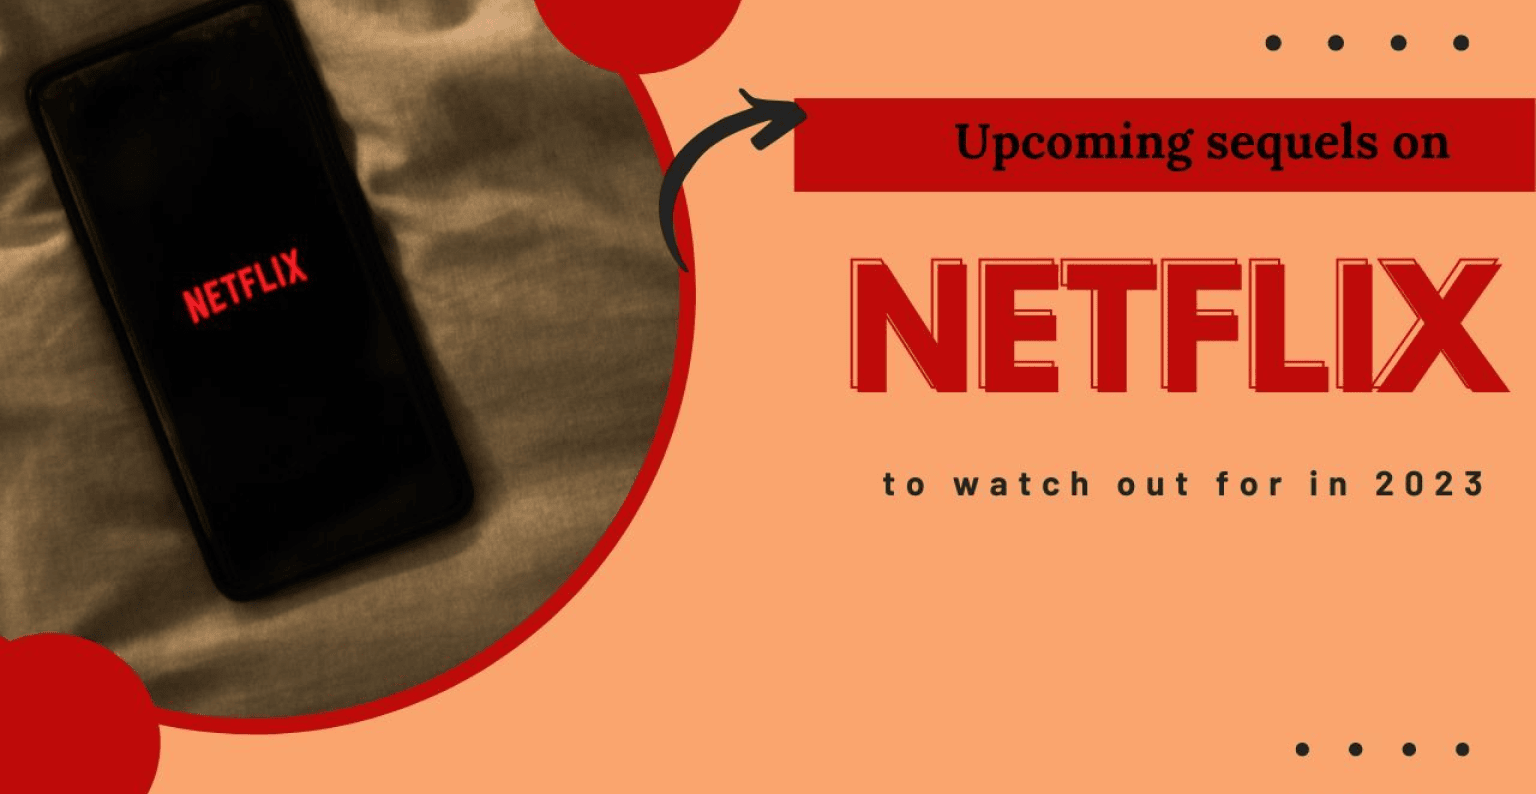 Upcoming sequels on netflix to watch out for in 2023